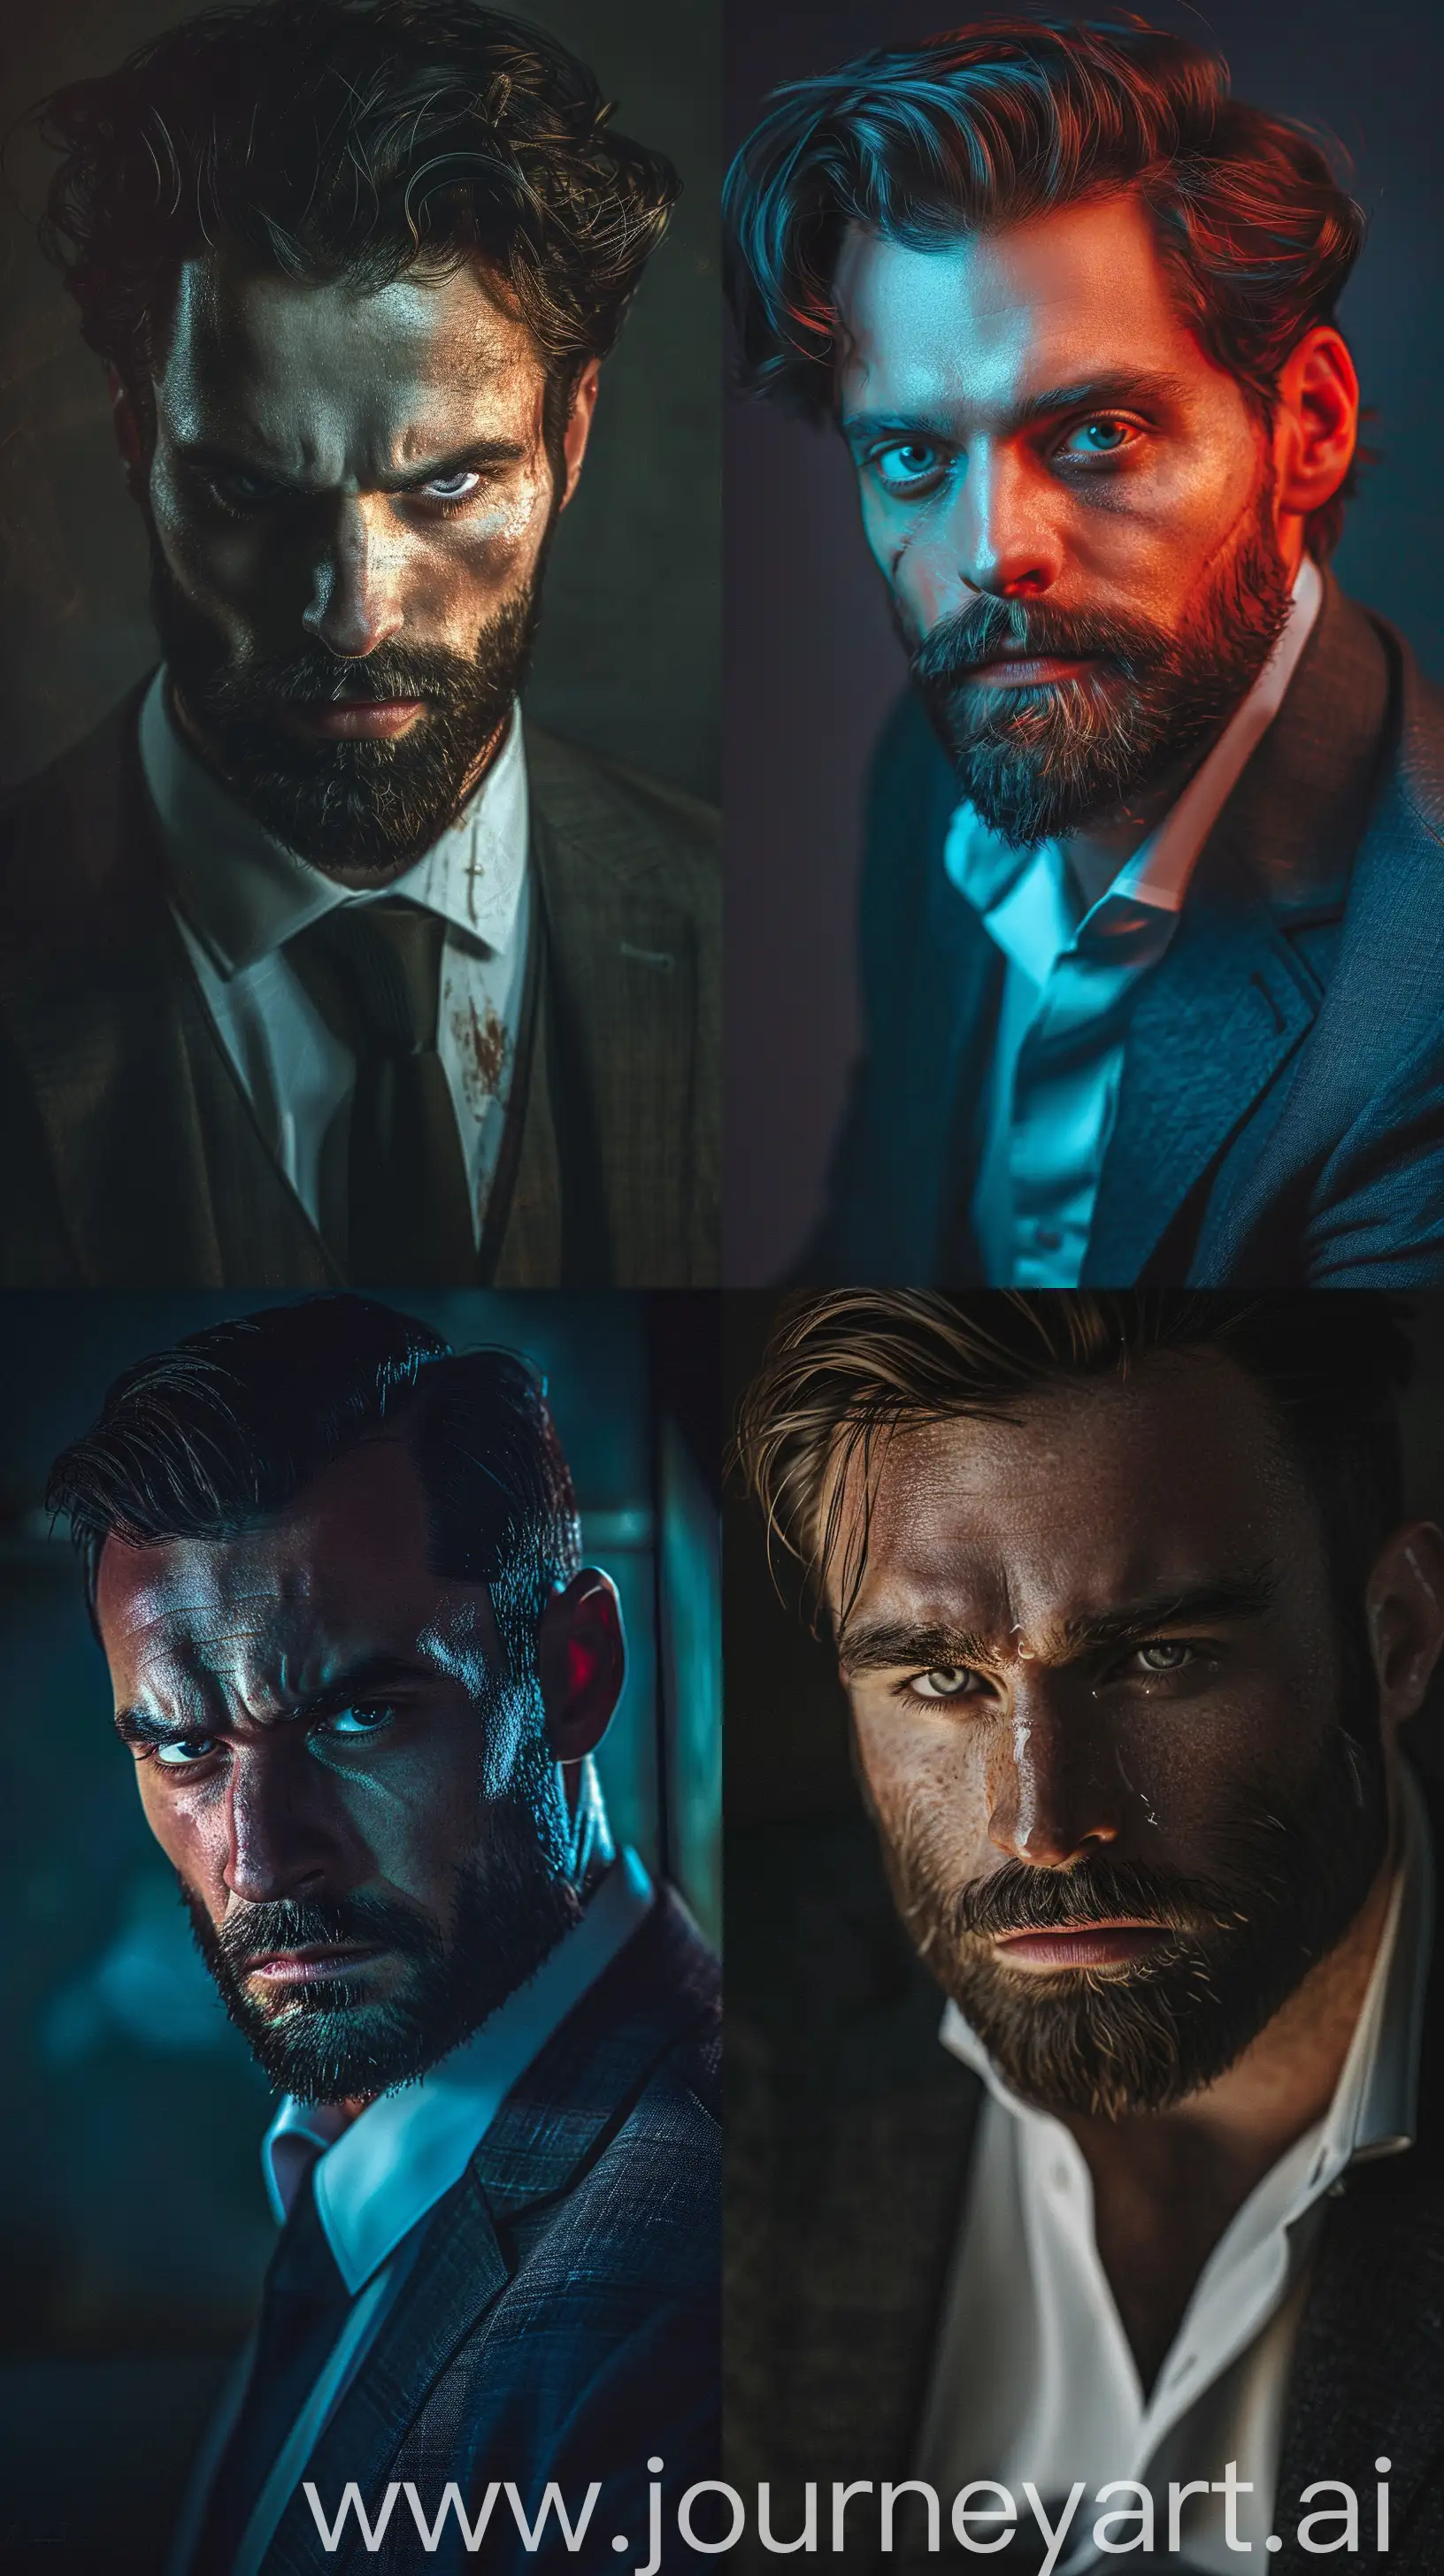 Movie Poster Photography: A Men Wearing Modern Formal Outfit, Medium Hair and Beard, Looking to the Camera, Realistic Light Reflections & Shadow, Creepy Theme, Cinematic Pose, Medium Shot, Affinity Designer Software, High Precision, --ar 9:16
